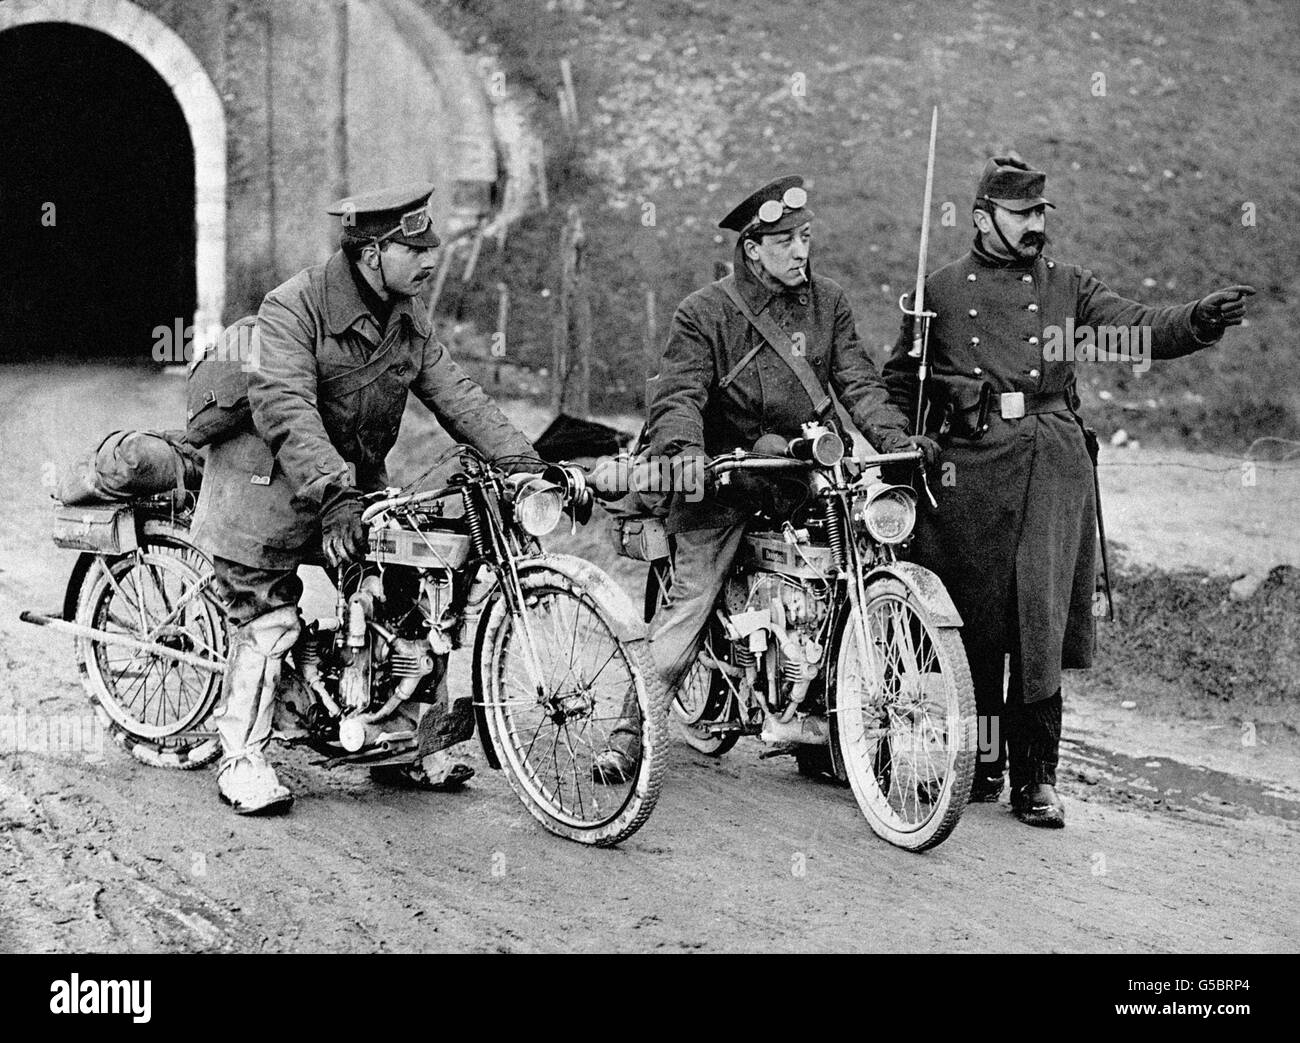 Motorcycle dispatch riders from the British Expeditionary Force (BEF), on Douglas 349cc motorcycles, are given directions by a French sentry at an unknown location in northern France. Stock Photo